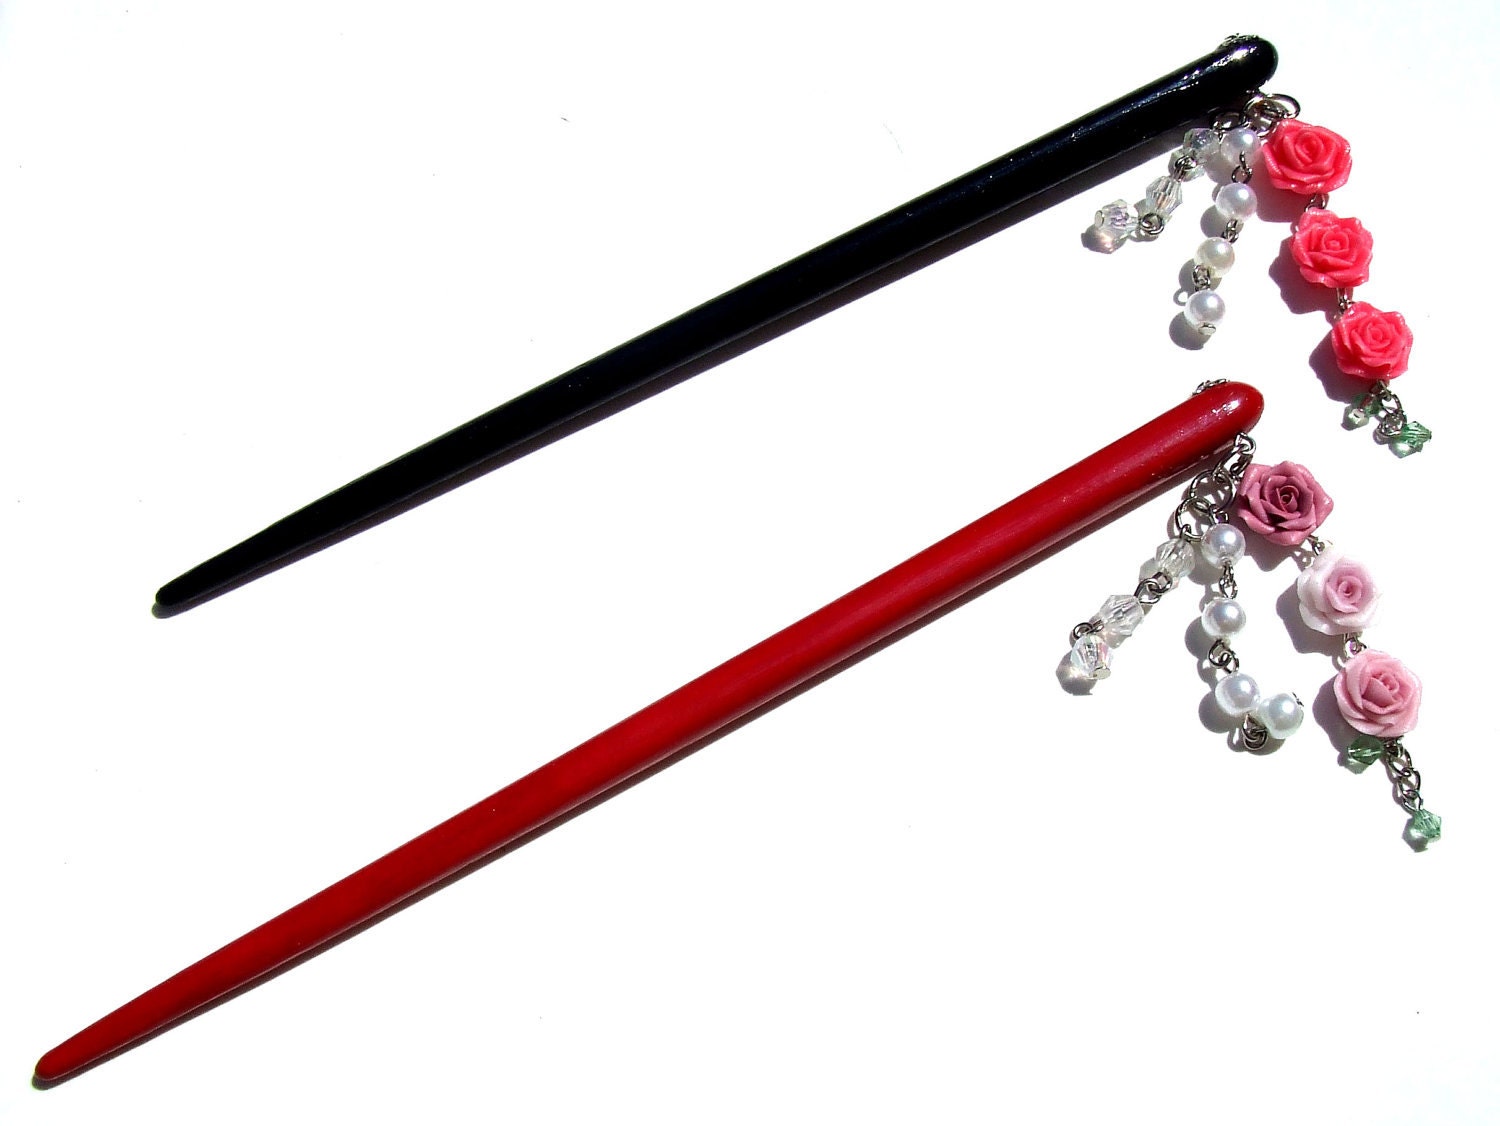 KANZASHI chopstick hair ornament with hand made rose charms and beads